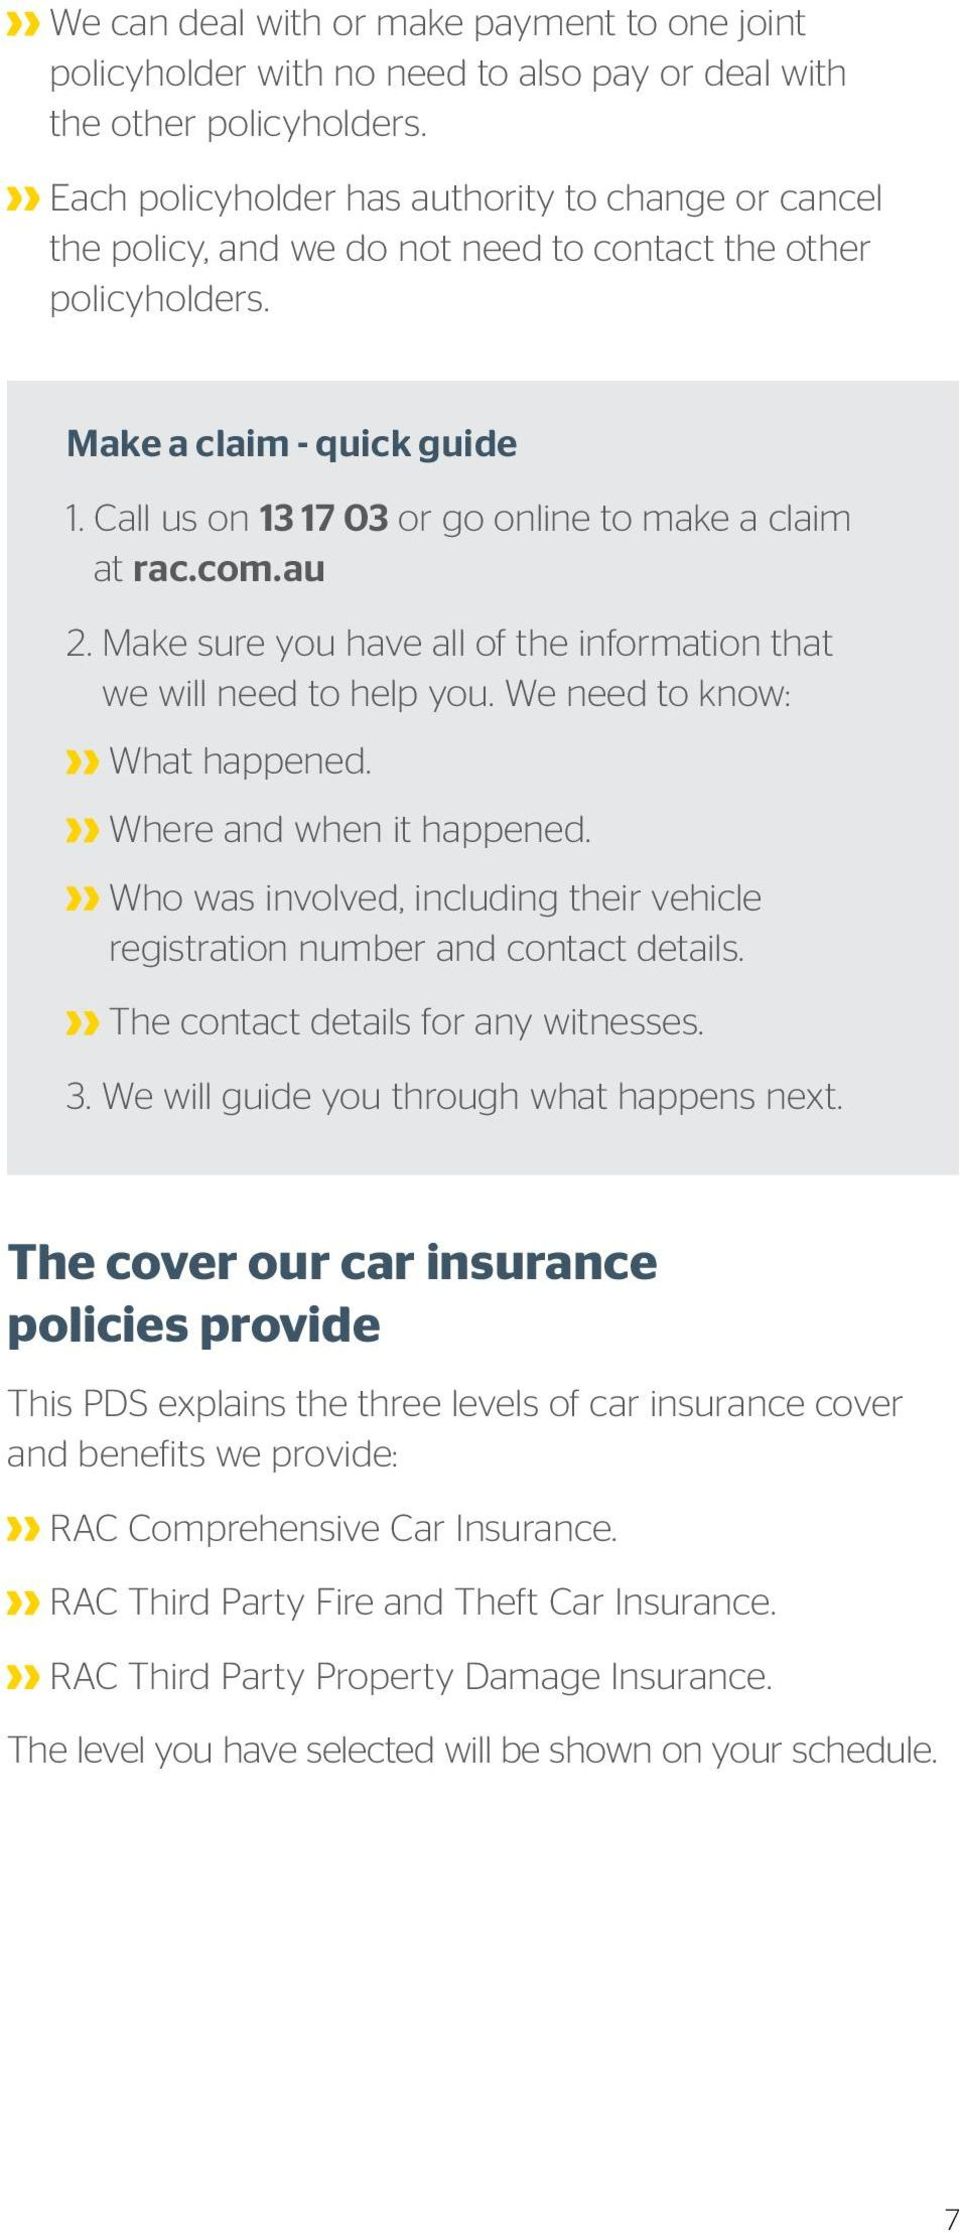 Call us on 13 17 03 or go online to make a claim at rac.com.au 2. Make sure you have all of the information that we will need to help you. We need to know: What happened. Where and when it happened.